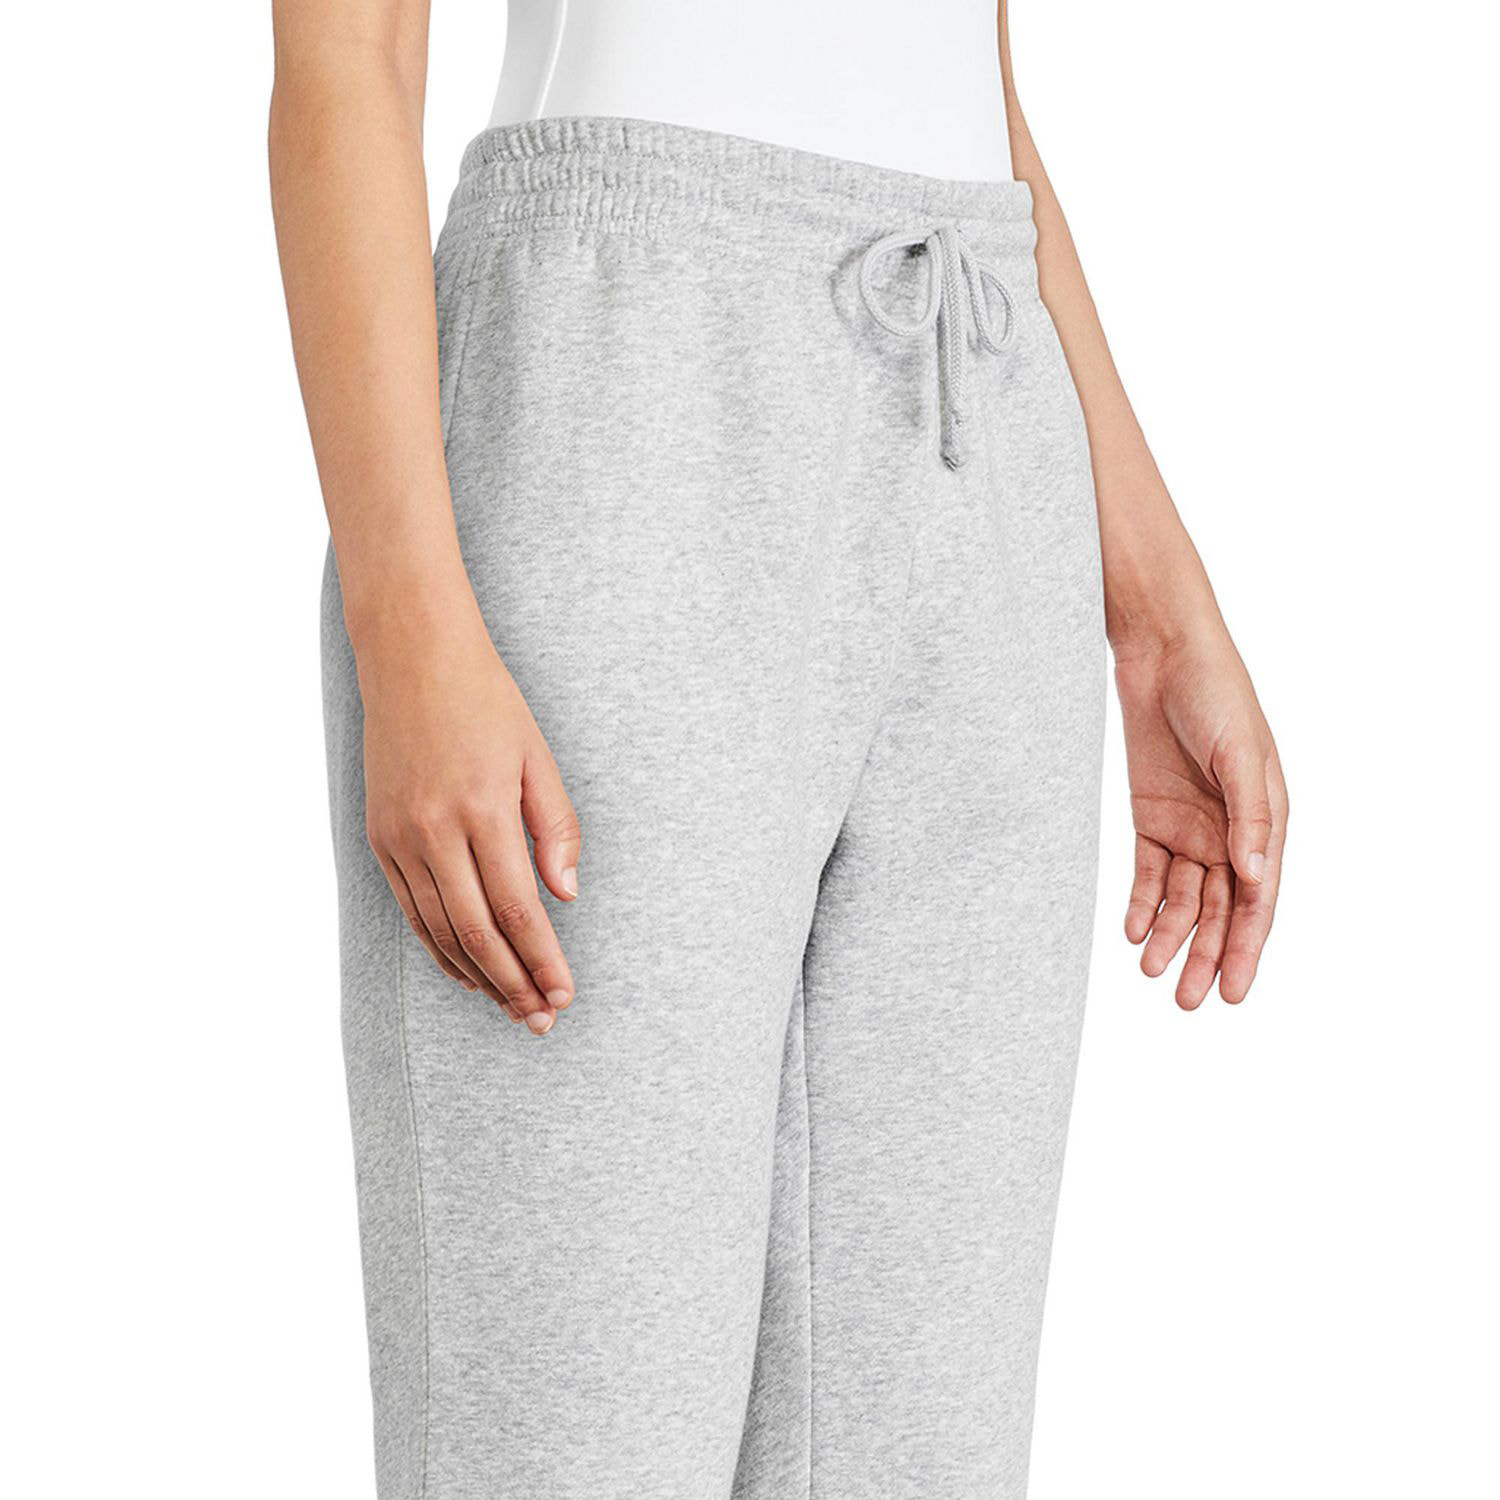 Xersion women's Jogger sweatpants Size XL - $19 - From Blooming